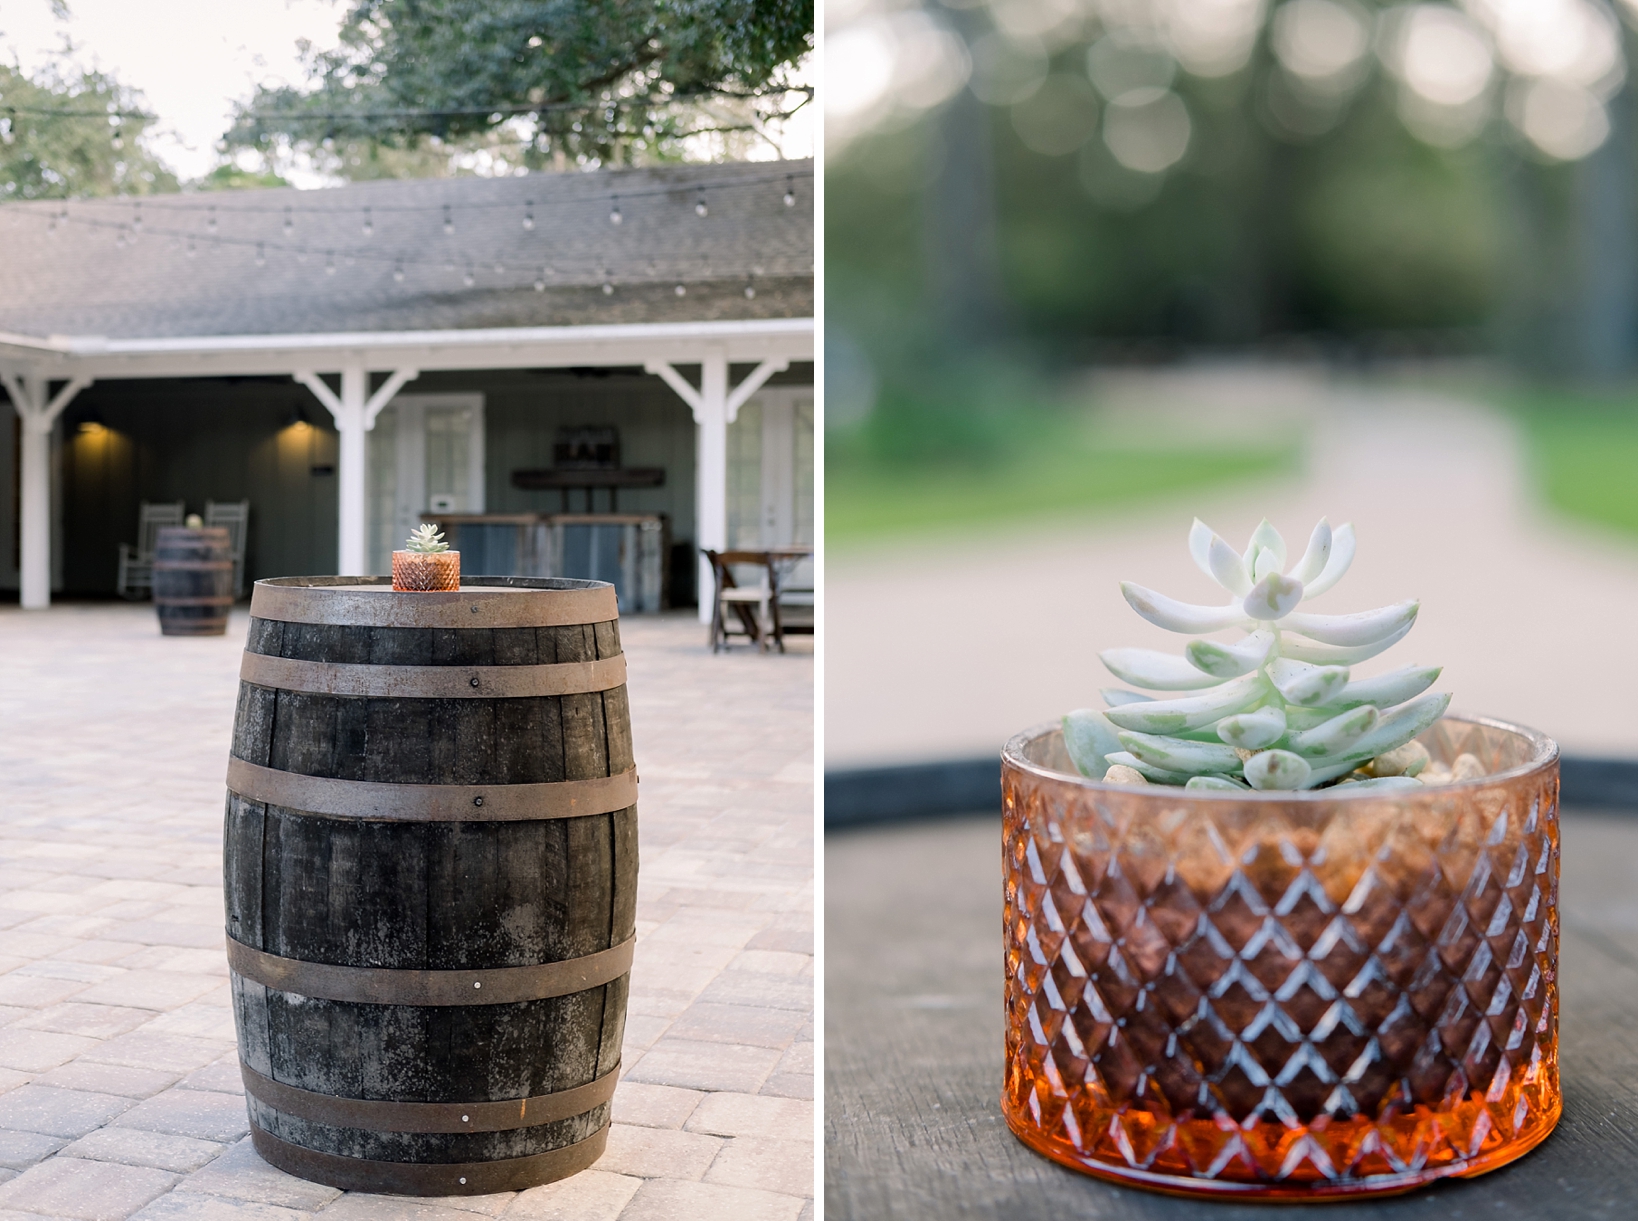 Reception details at the Bowing Oaks Plantation in Jacksonville, FL including a small succulent